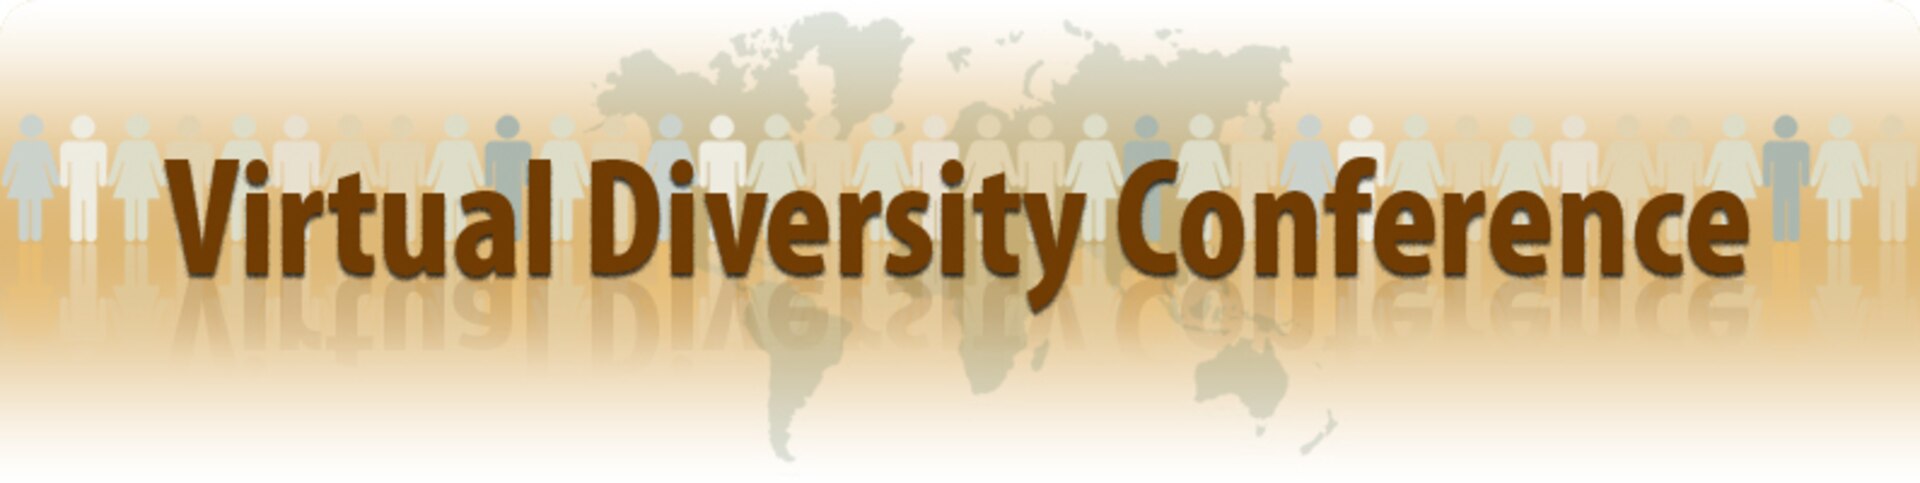 Virtual Diversity Conference graphic